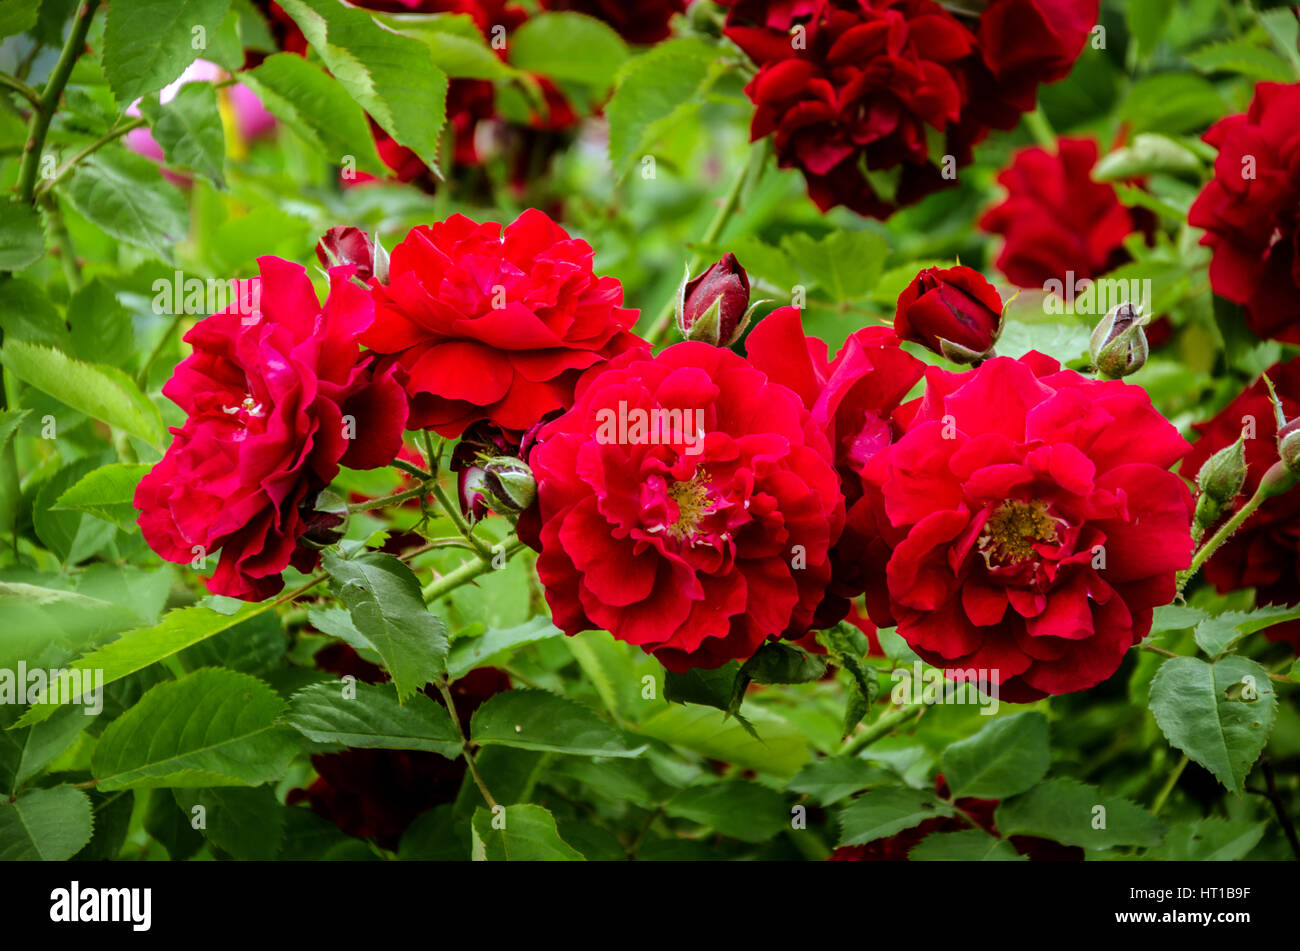 beautiful rose bush unusual spots with red flowers and green leaves Stock Photo